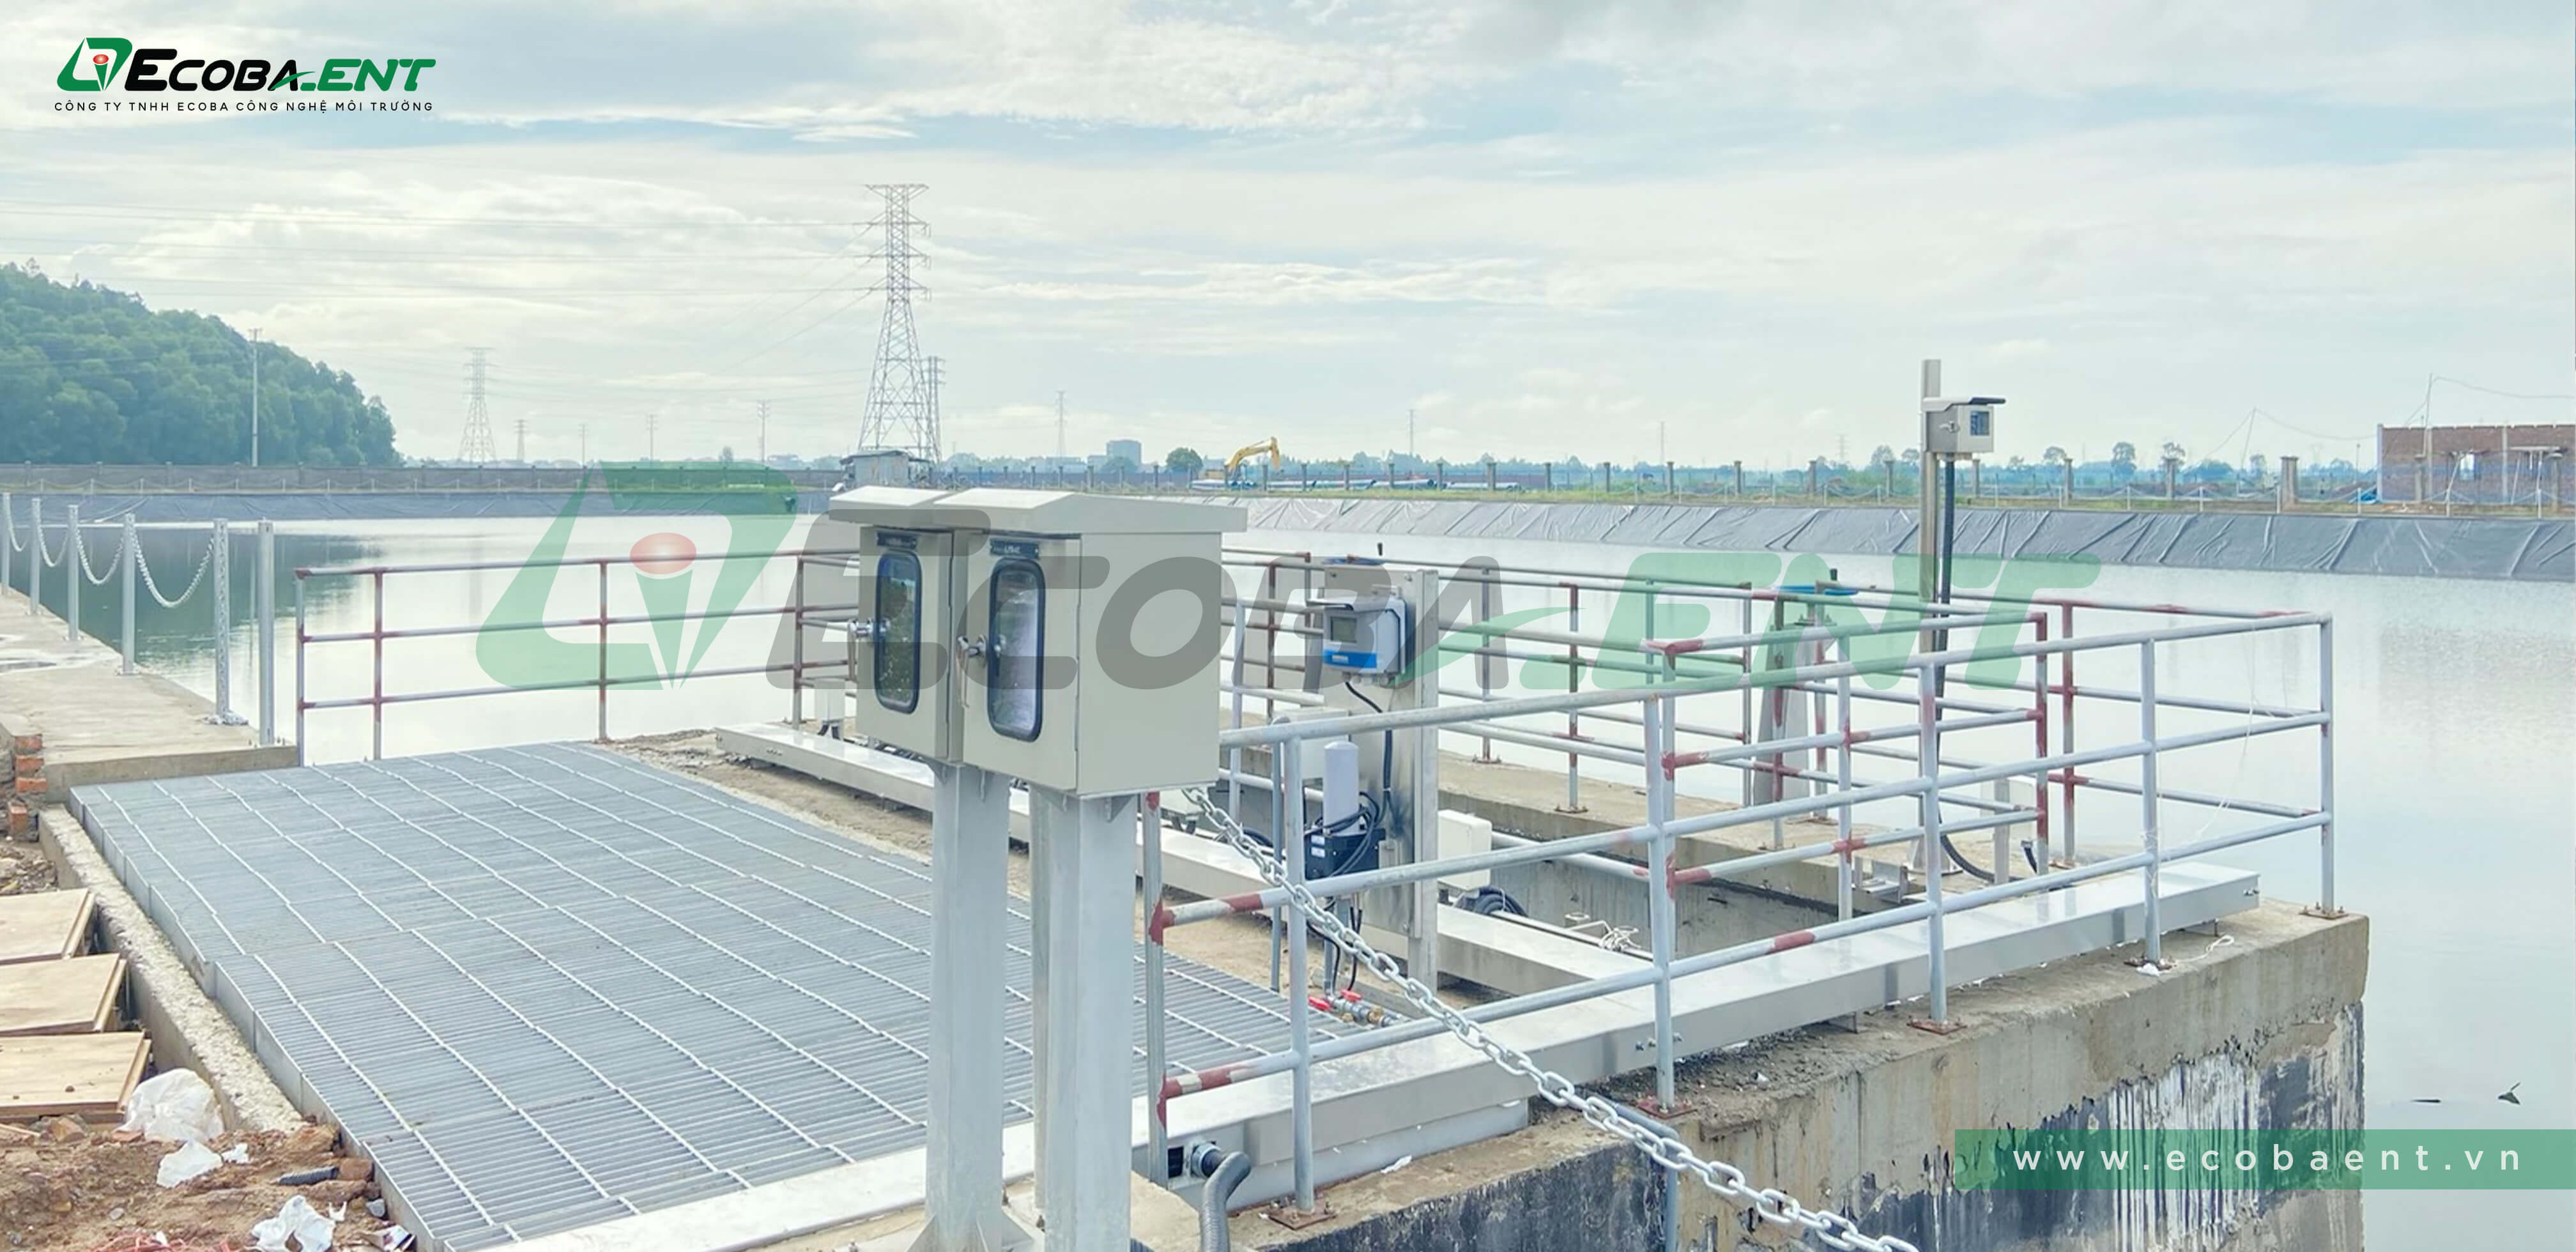 Water supply treatment for Nam Son Hap Linh industrial park